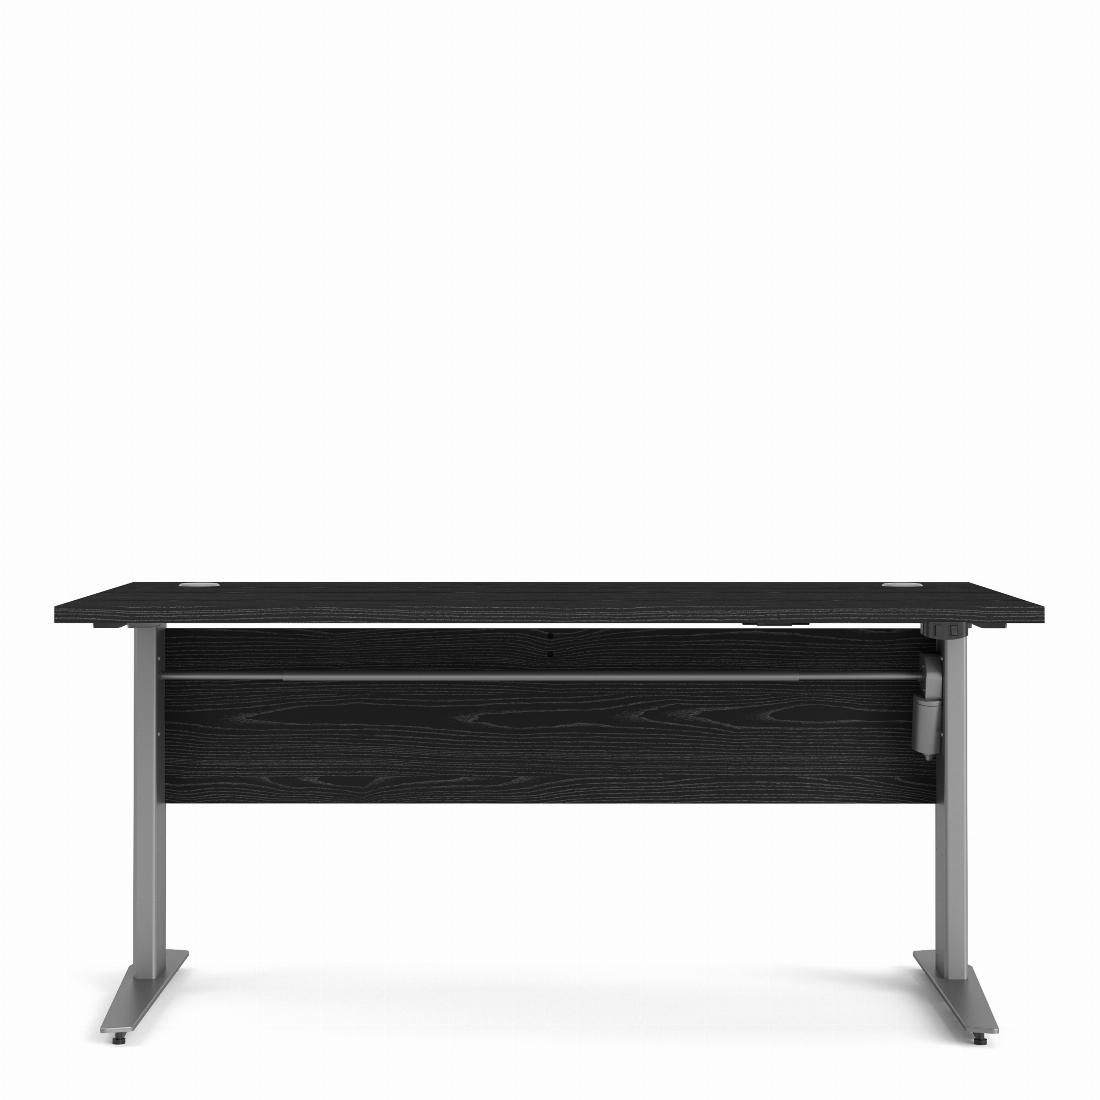 Prima Desk 150 cm in Black woodgrain with Height adjustable legs with electric control in Silver grey steel